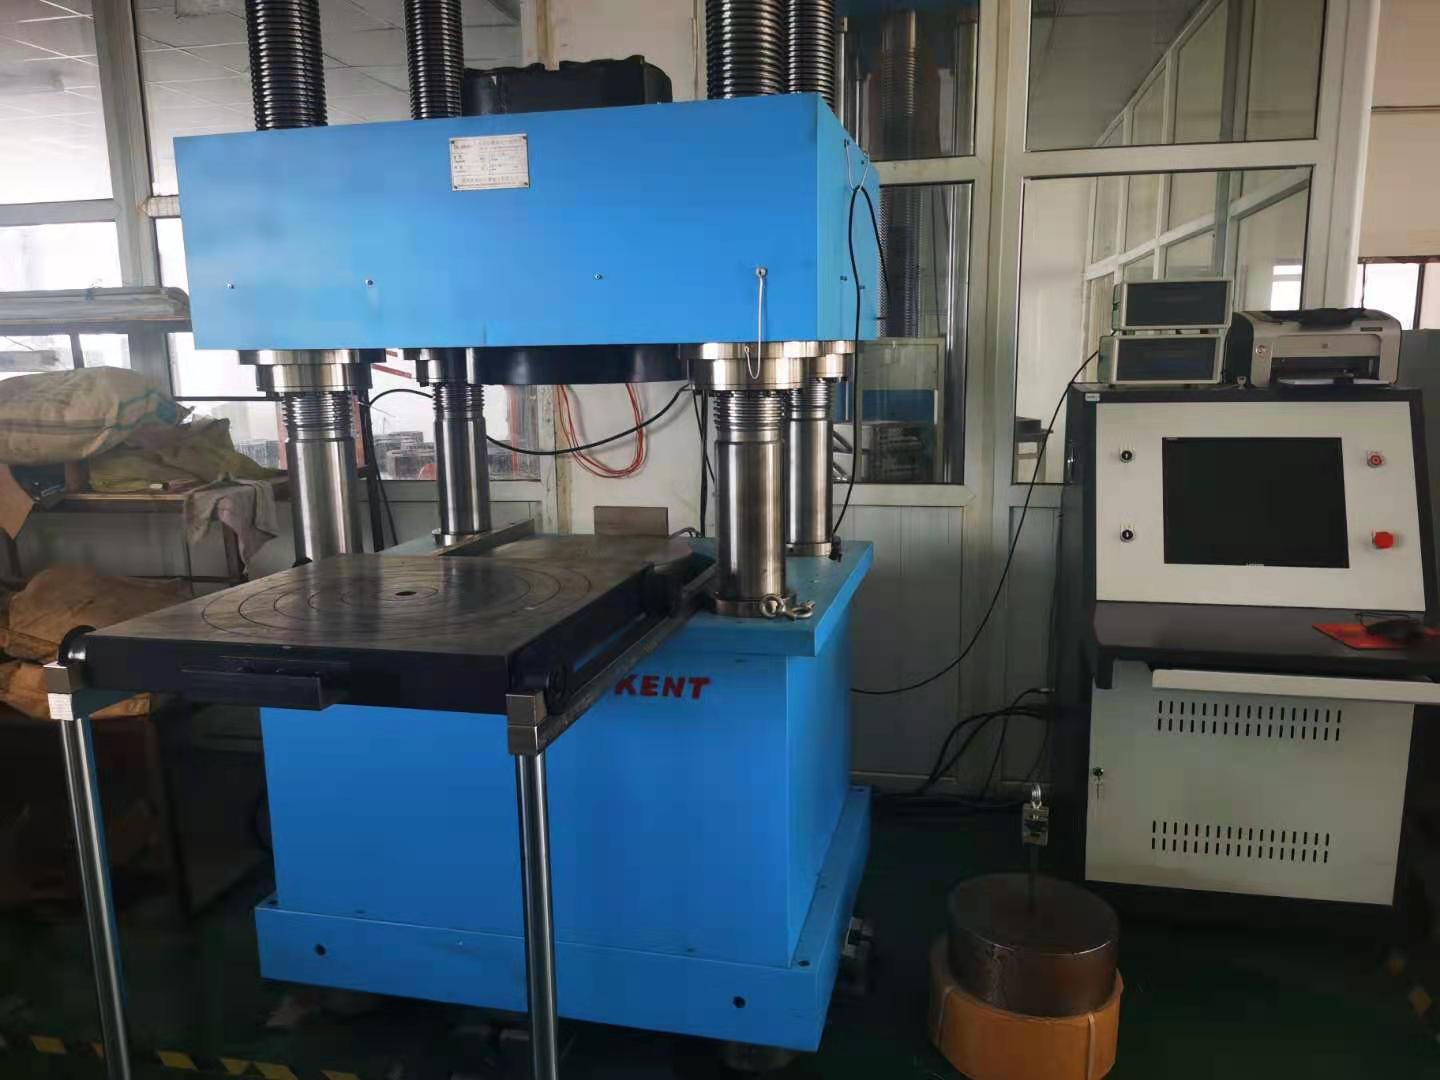 Brand new 800T load cell calibration machine joins Zhimin production line